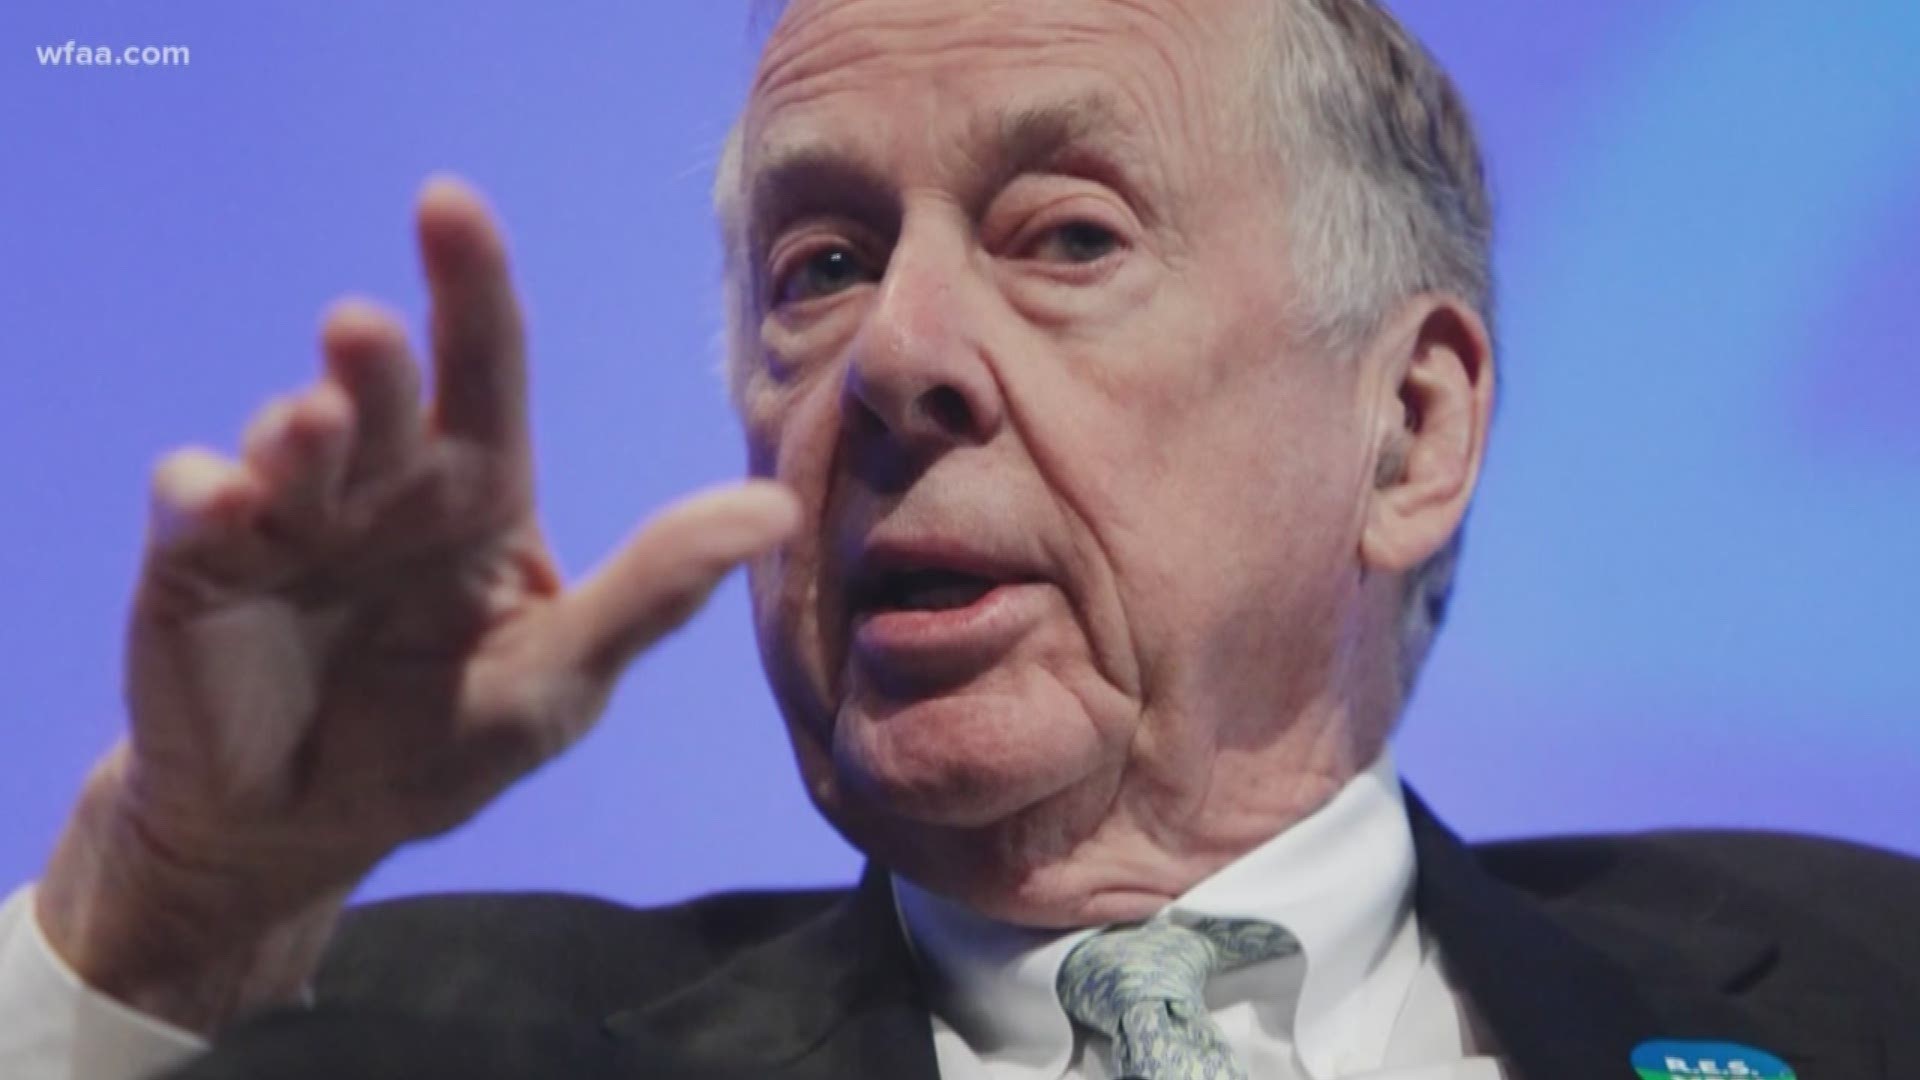 At the funeral for T. Boone Pickens, friends shared personal stories of a billionaire’s struggles and triumphs. The service was held Thursday in Dallas.